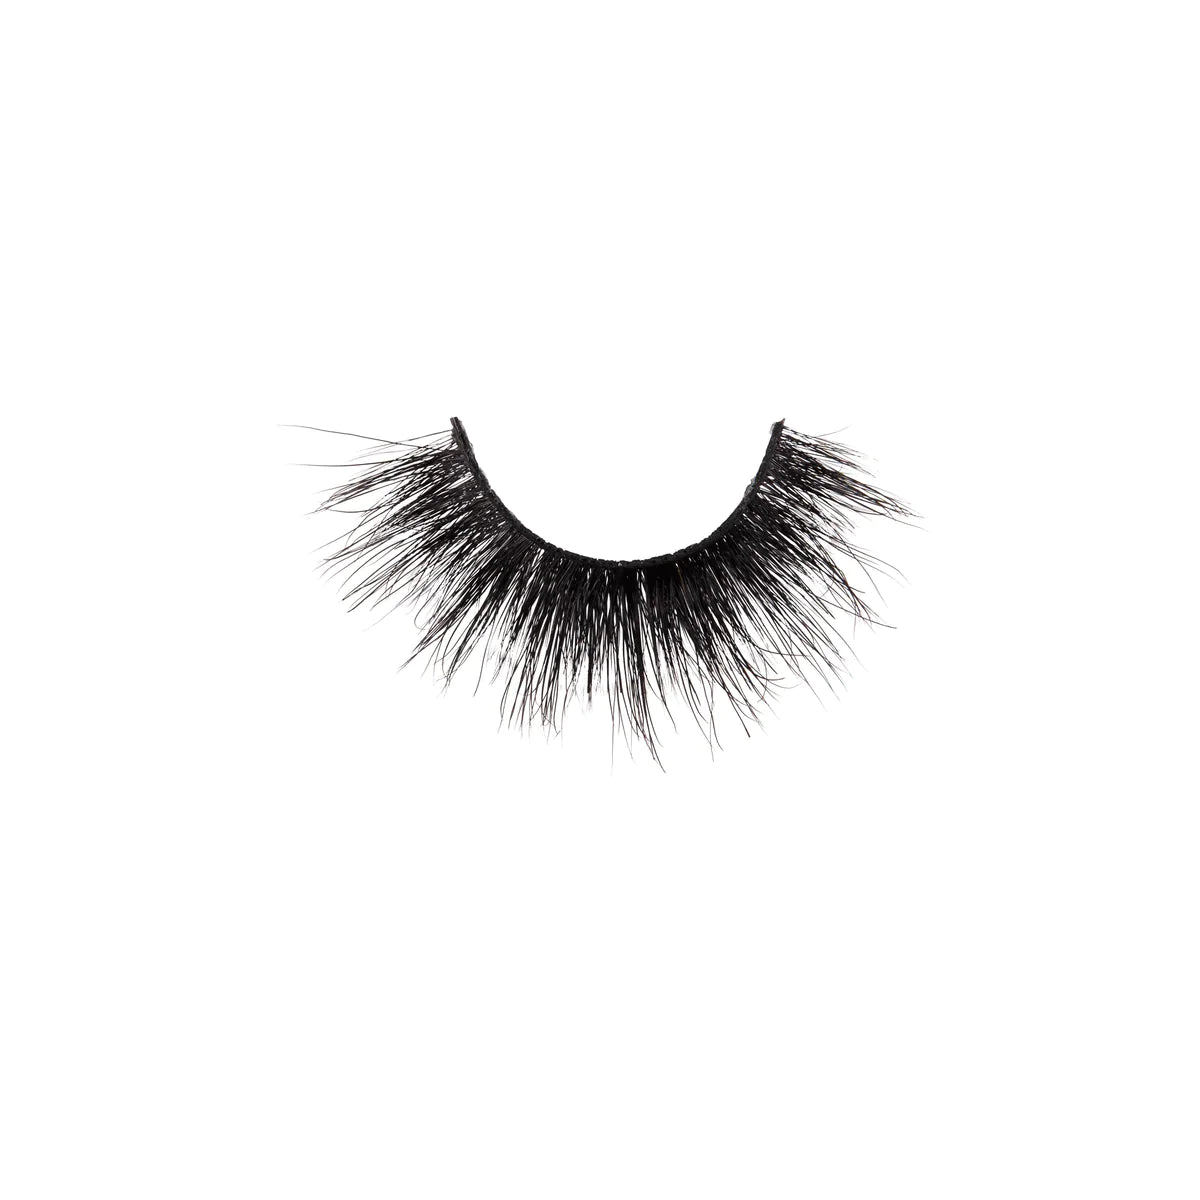 Restricted Mink Lashes - DaizyKat Cosmetics Restricted Mink Lashes Beauty Creations Eyelashes